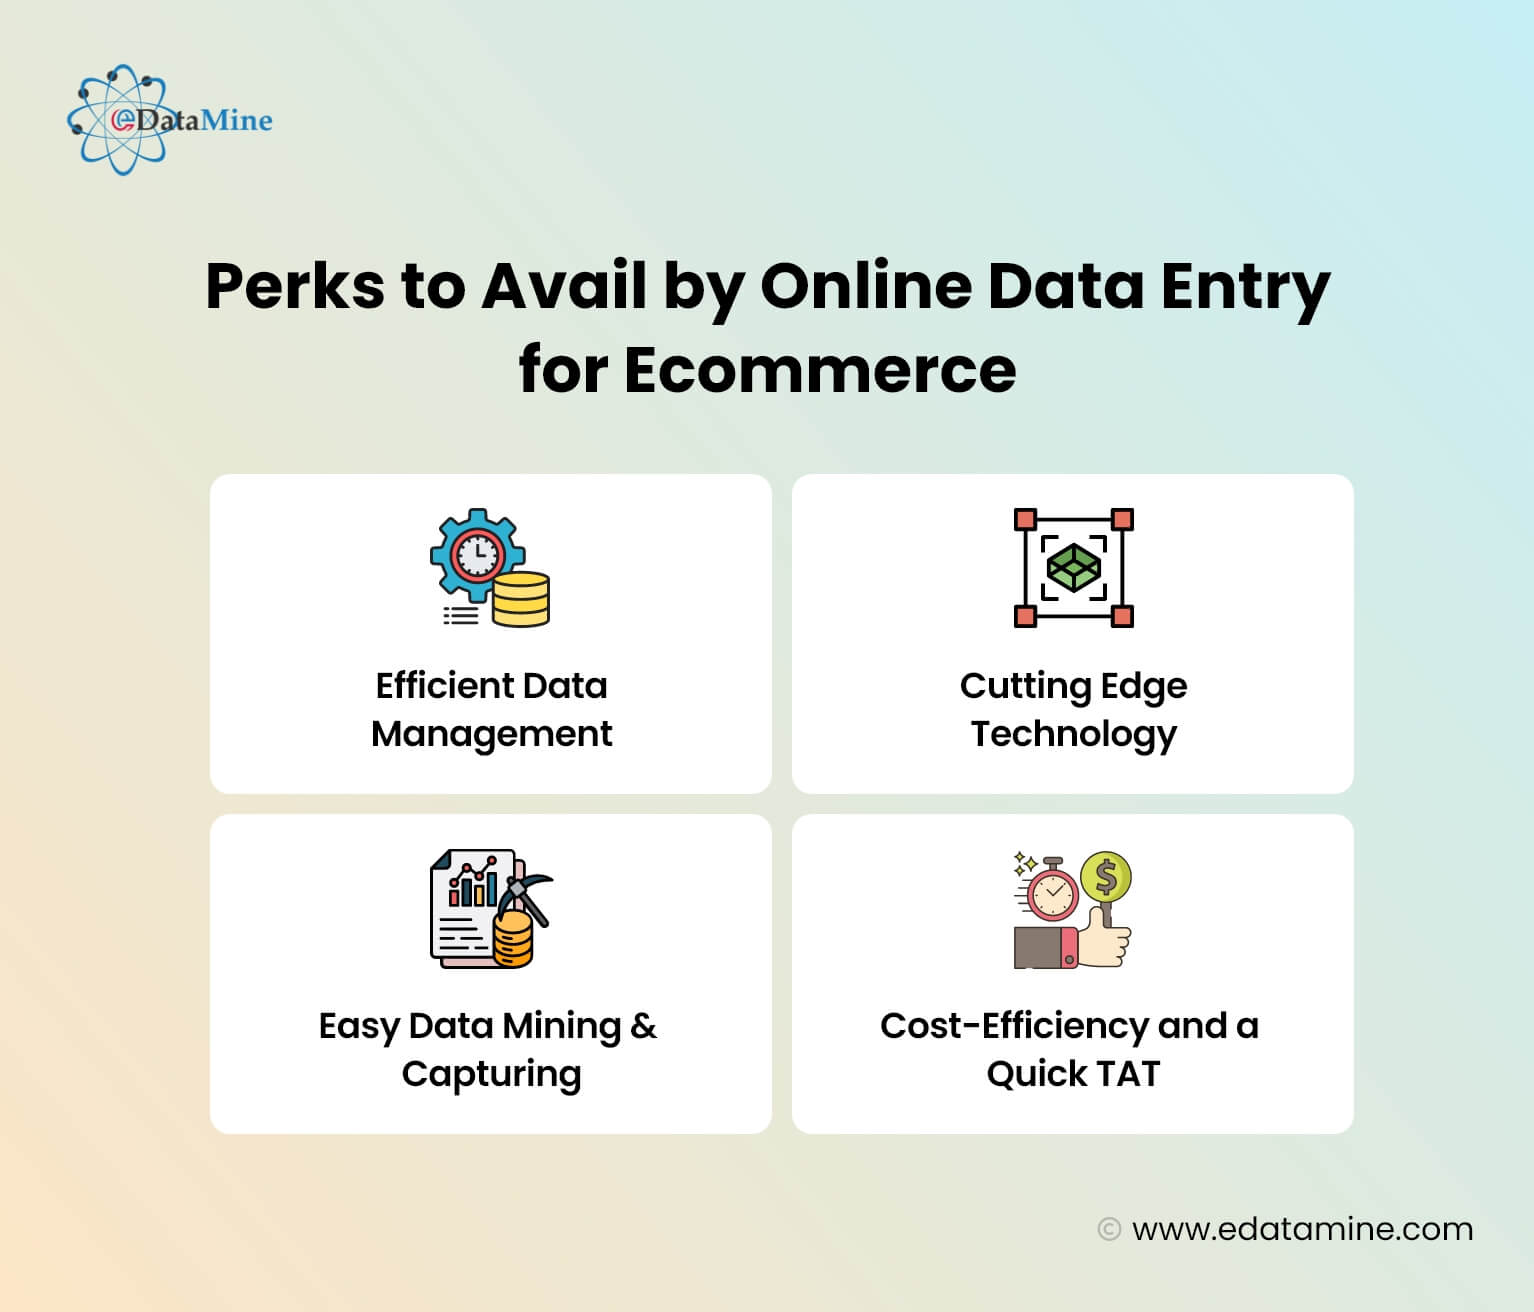 Perks to Avail by Online Data Entry for Ecommerce